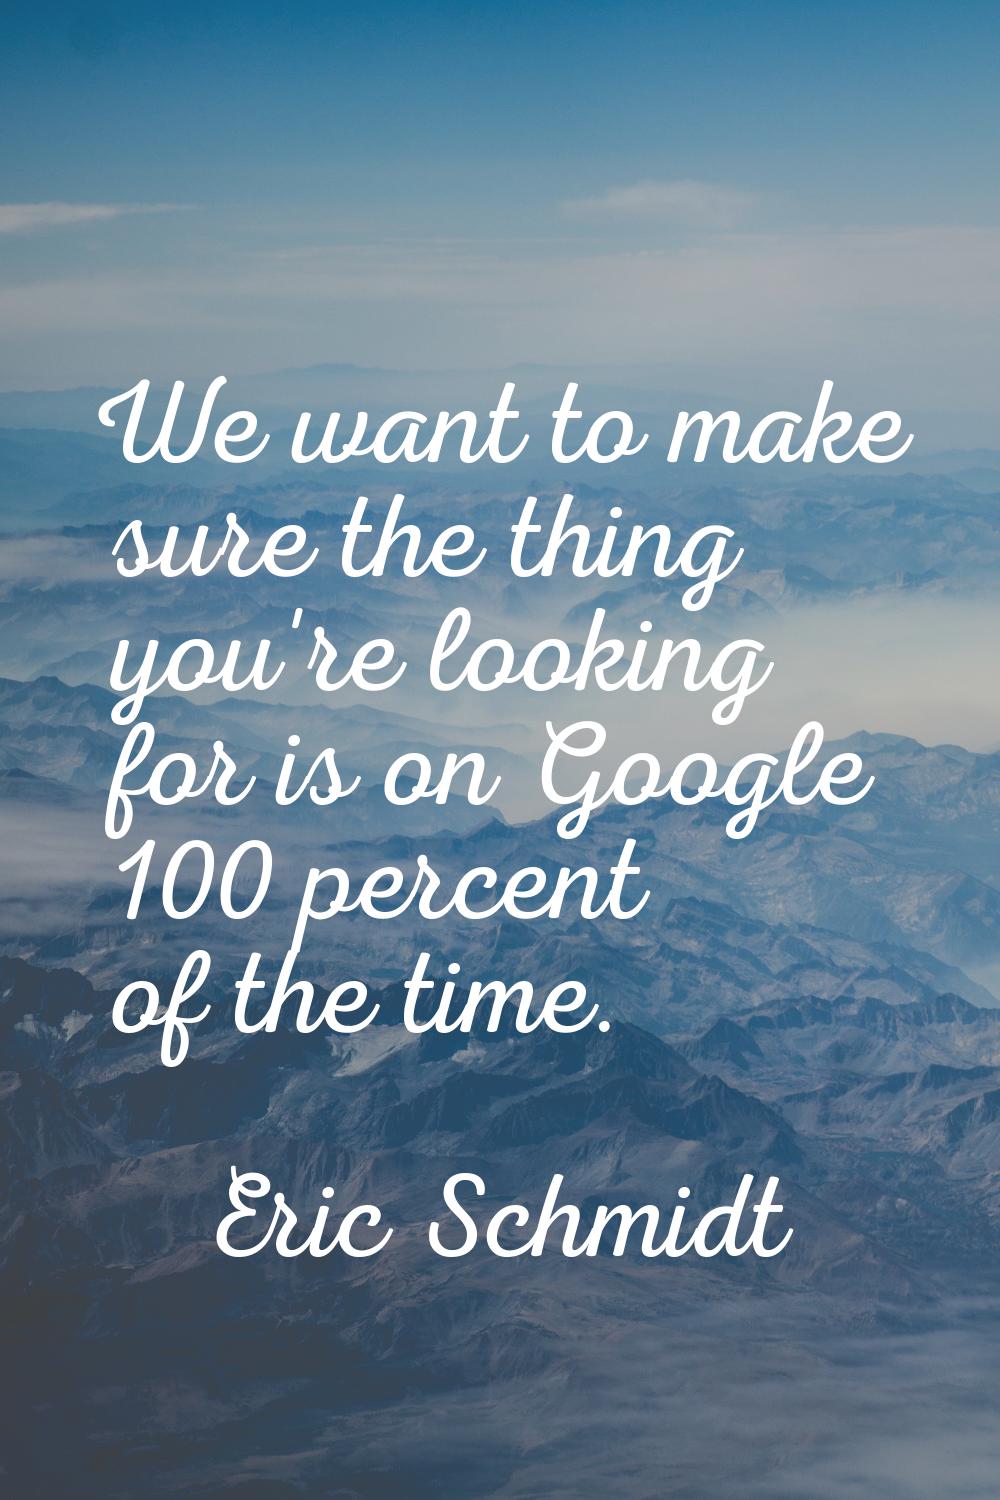 We want to make sure the thing you're looking for is on Google 100 percent of the time.